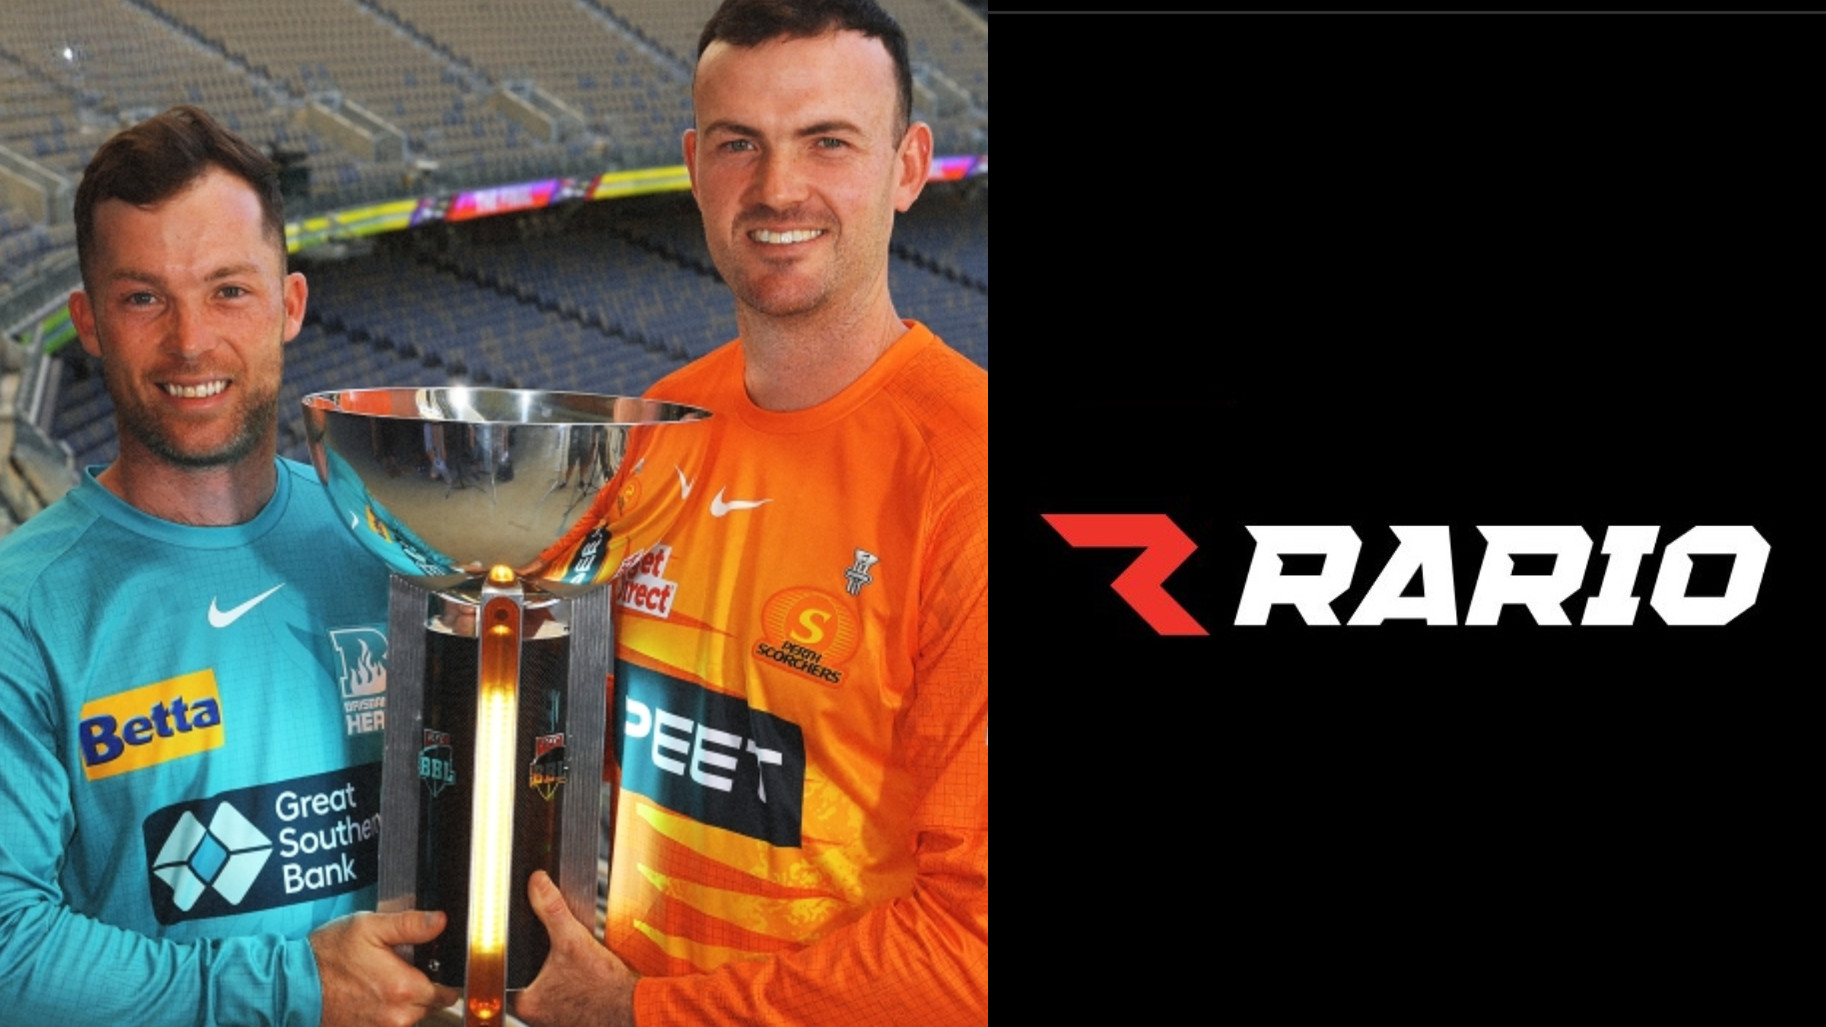 Rario D3 Predictions: Make sure to grab your Big Bash League (BBL) player cards and play for great prizes